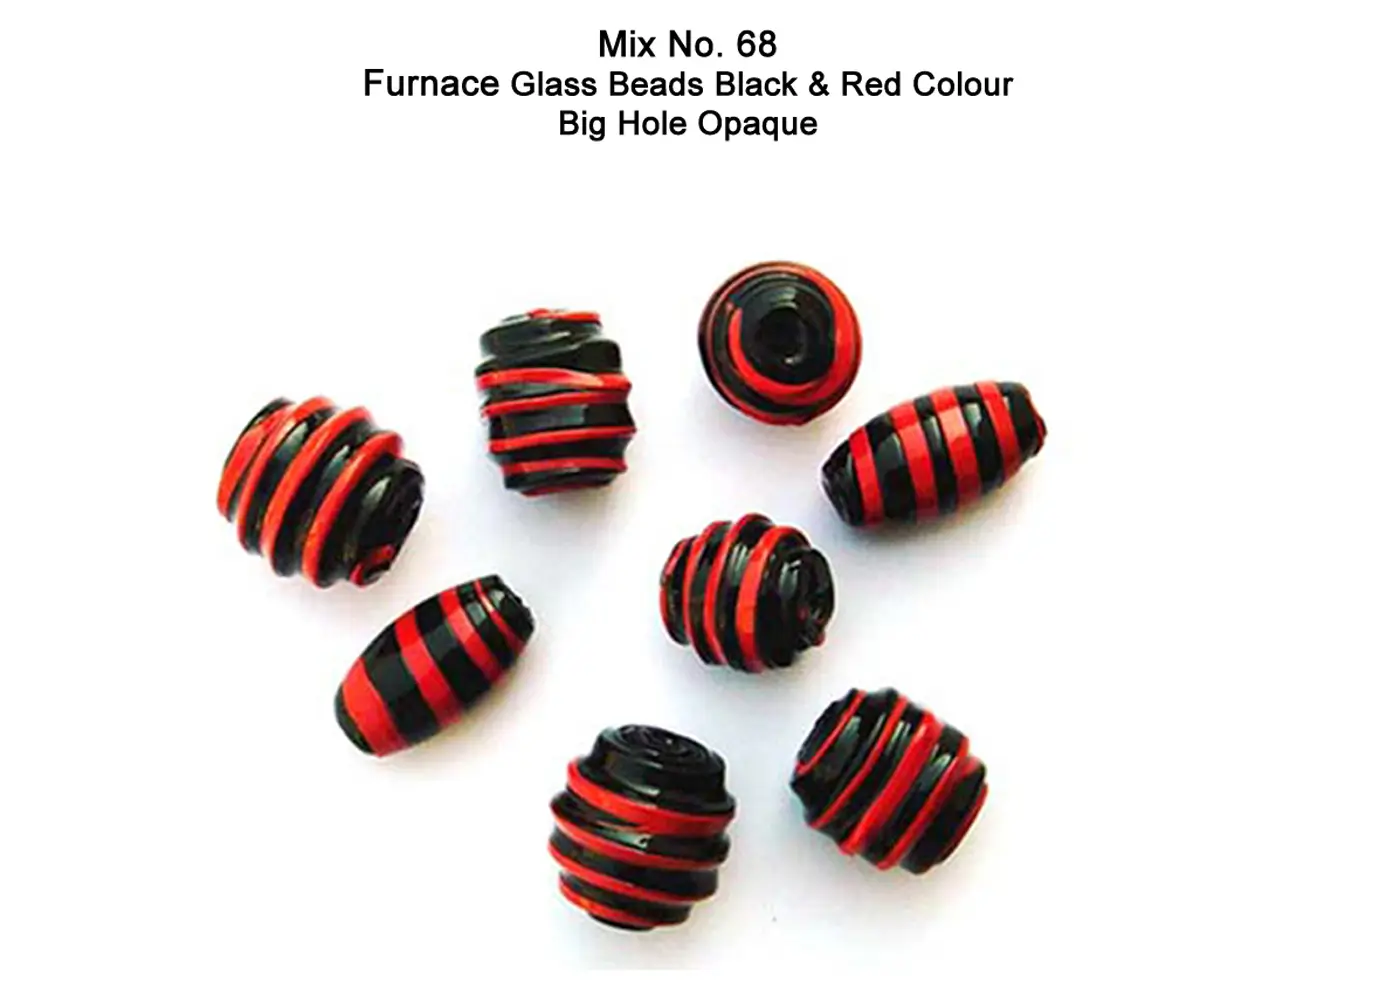 Furnace Glass Bead Black and Red color big hole Opaque